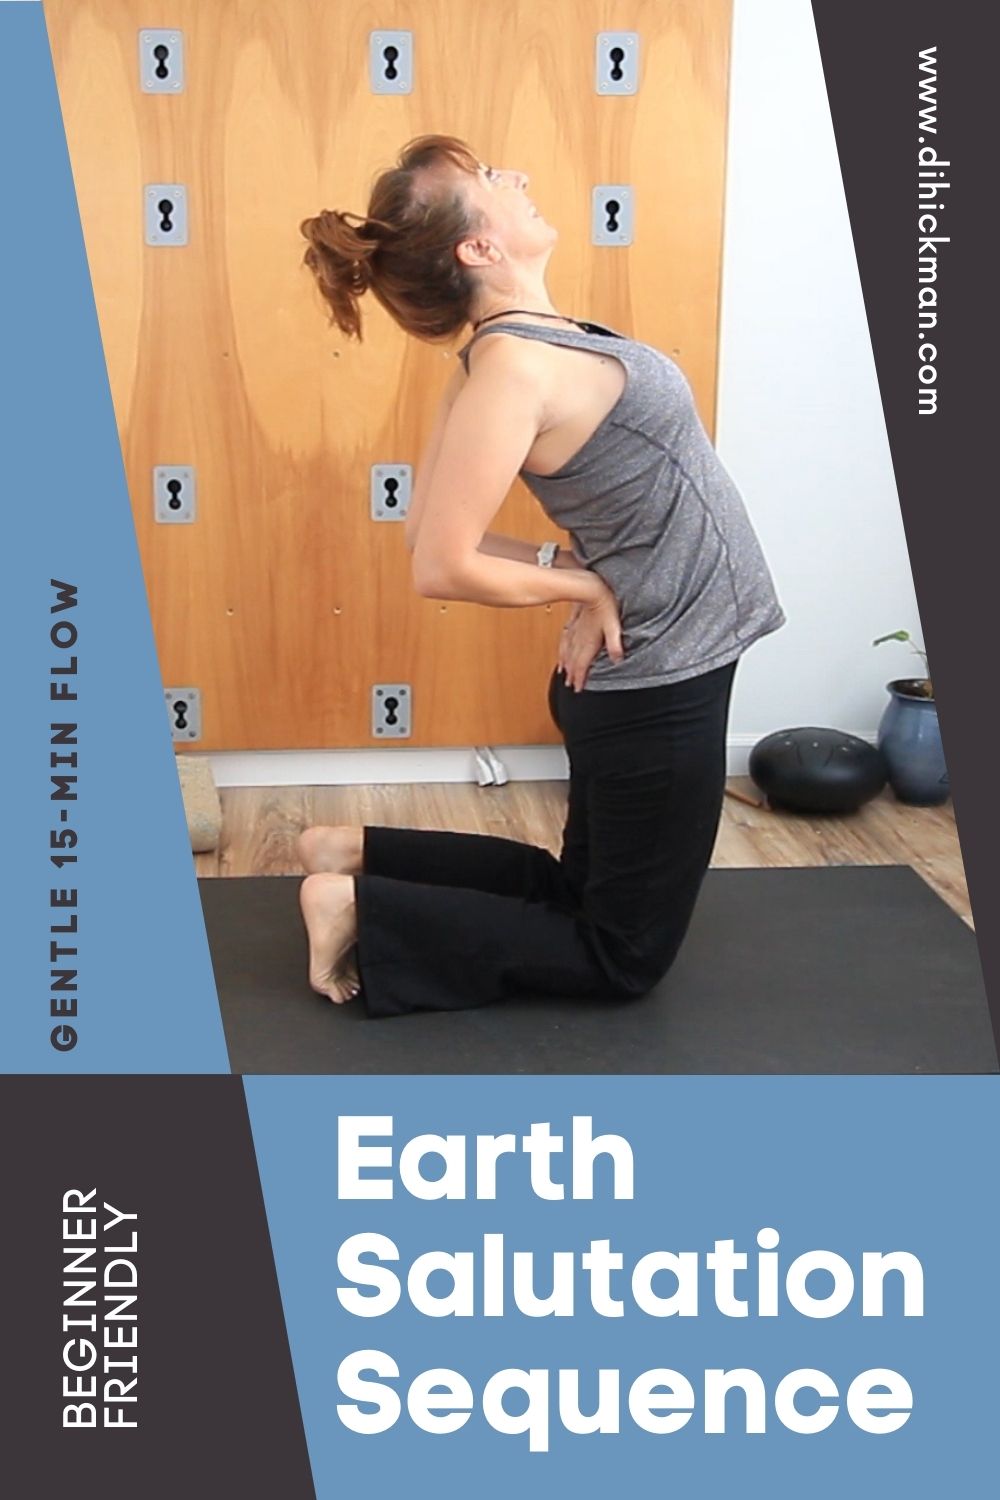 Earth salutation sequence